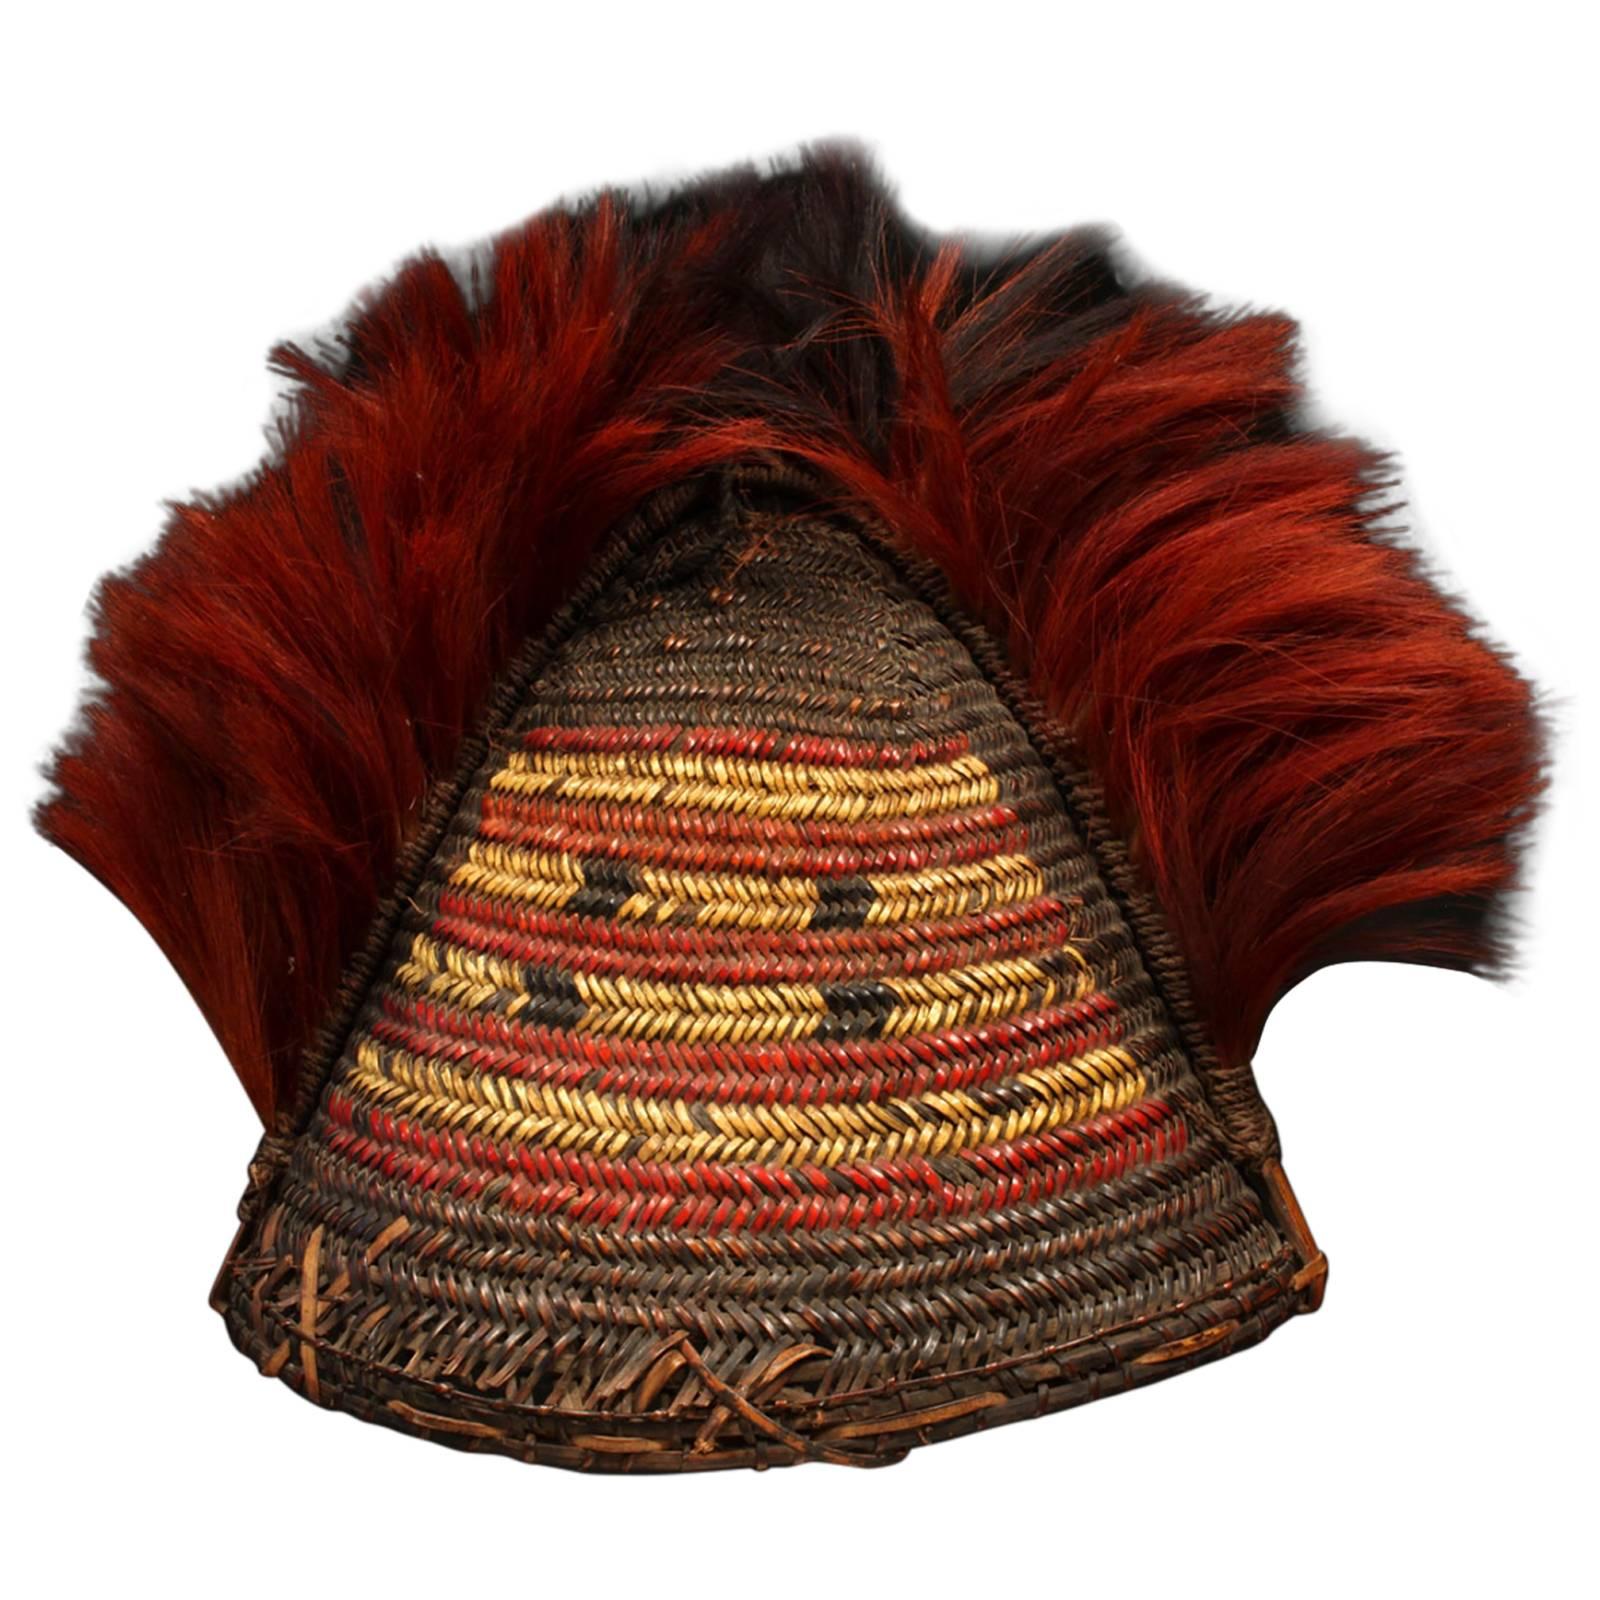 Early 20th Century Tribal Cane Warrior's Hat, Nagaland, Northeast India